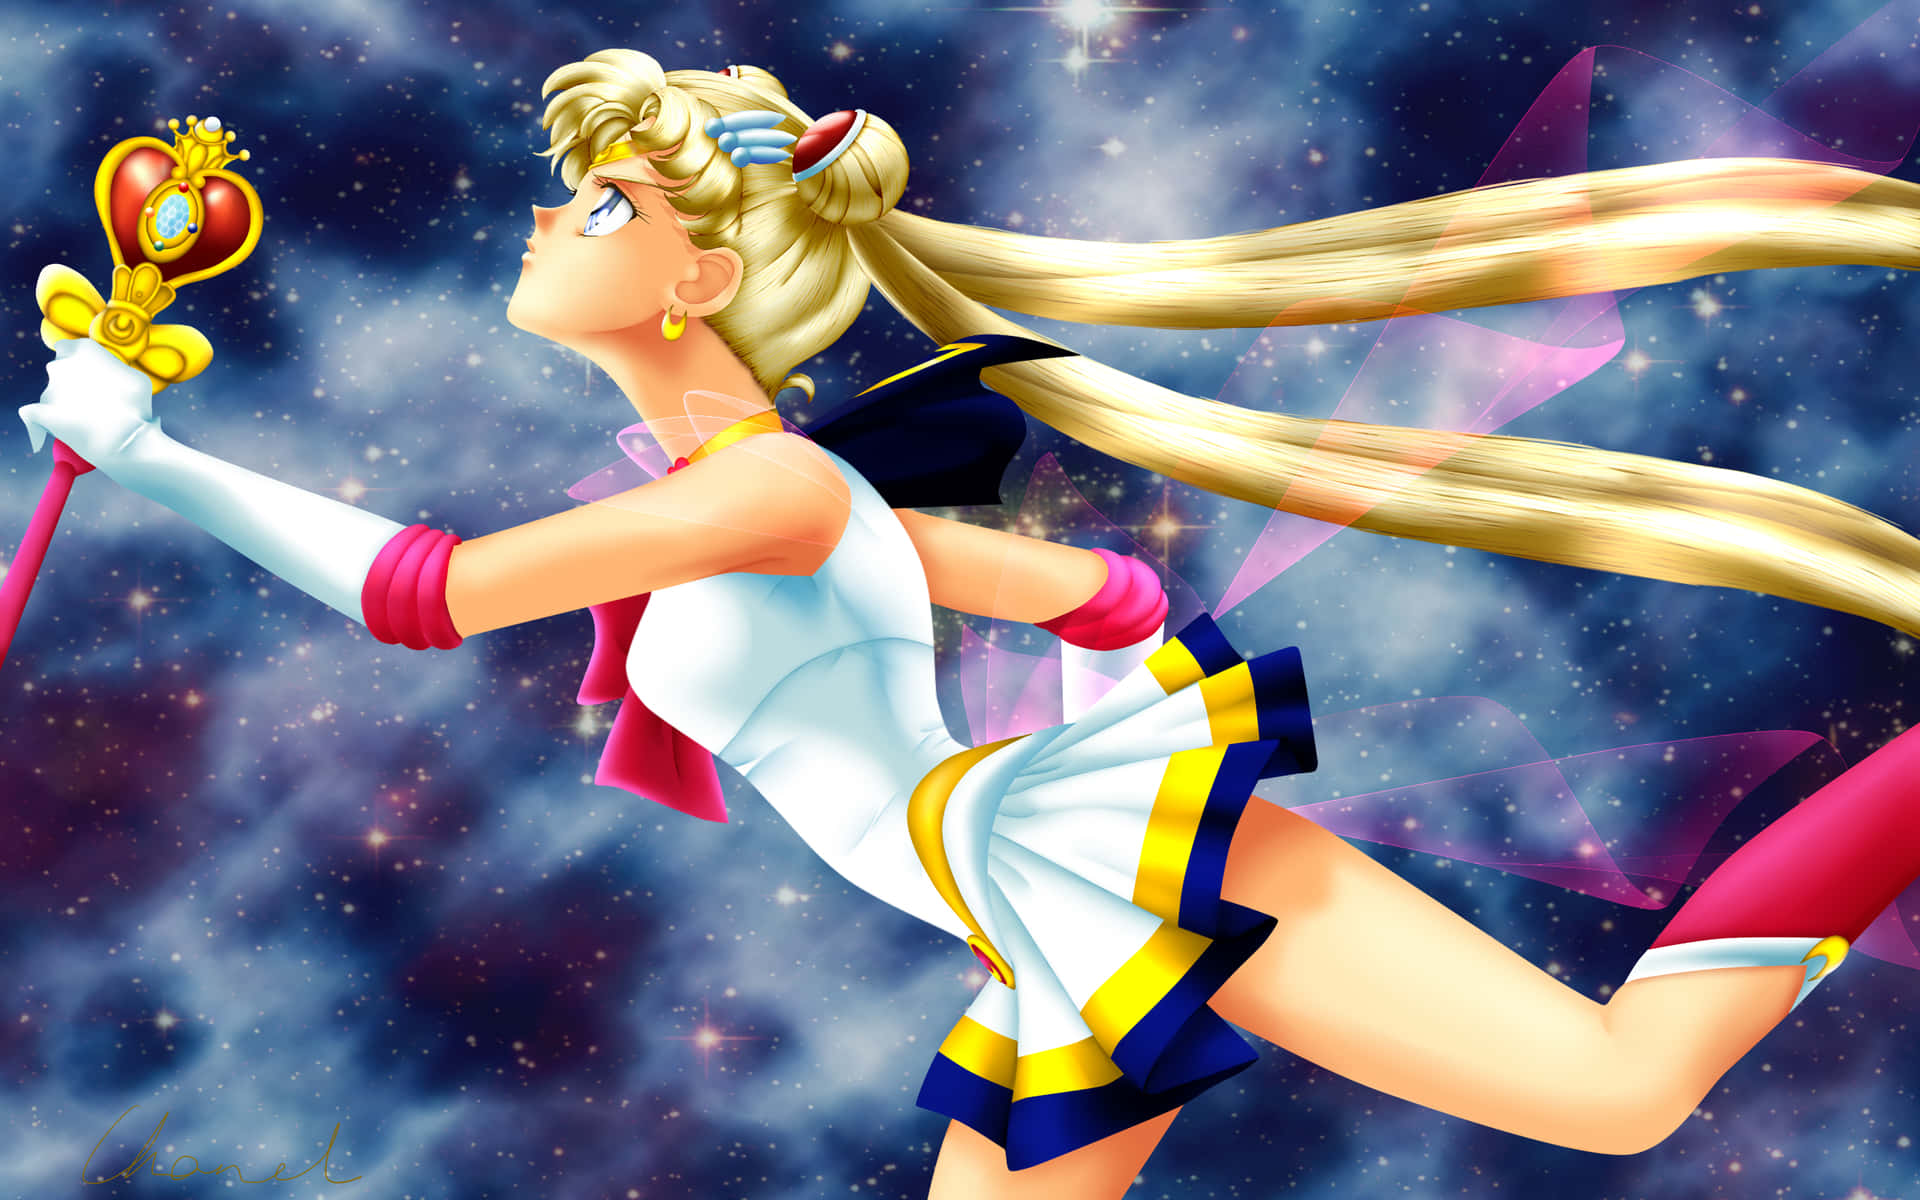 Sailor Moon and her brave allies use the power of the Moon to protect the world